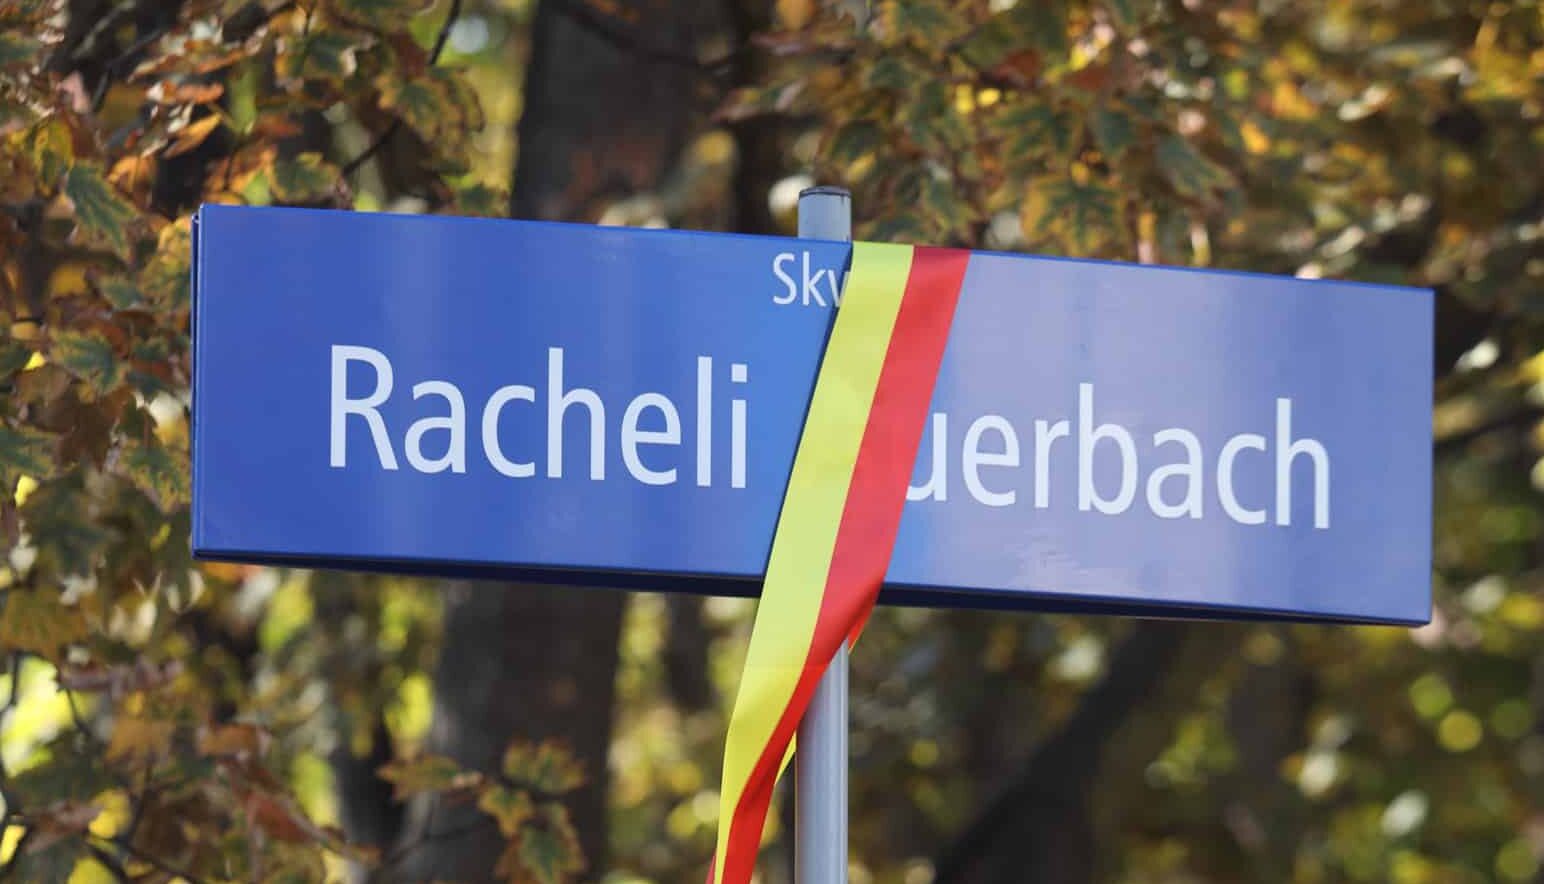 Rachela Auerbach is the new patron of a square in Warsaw